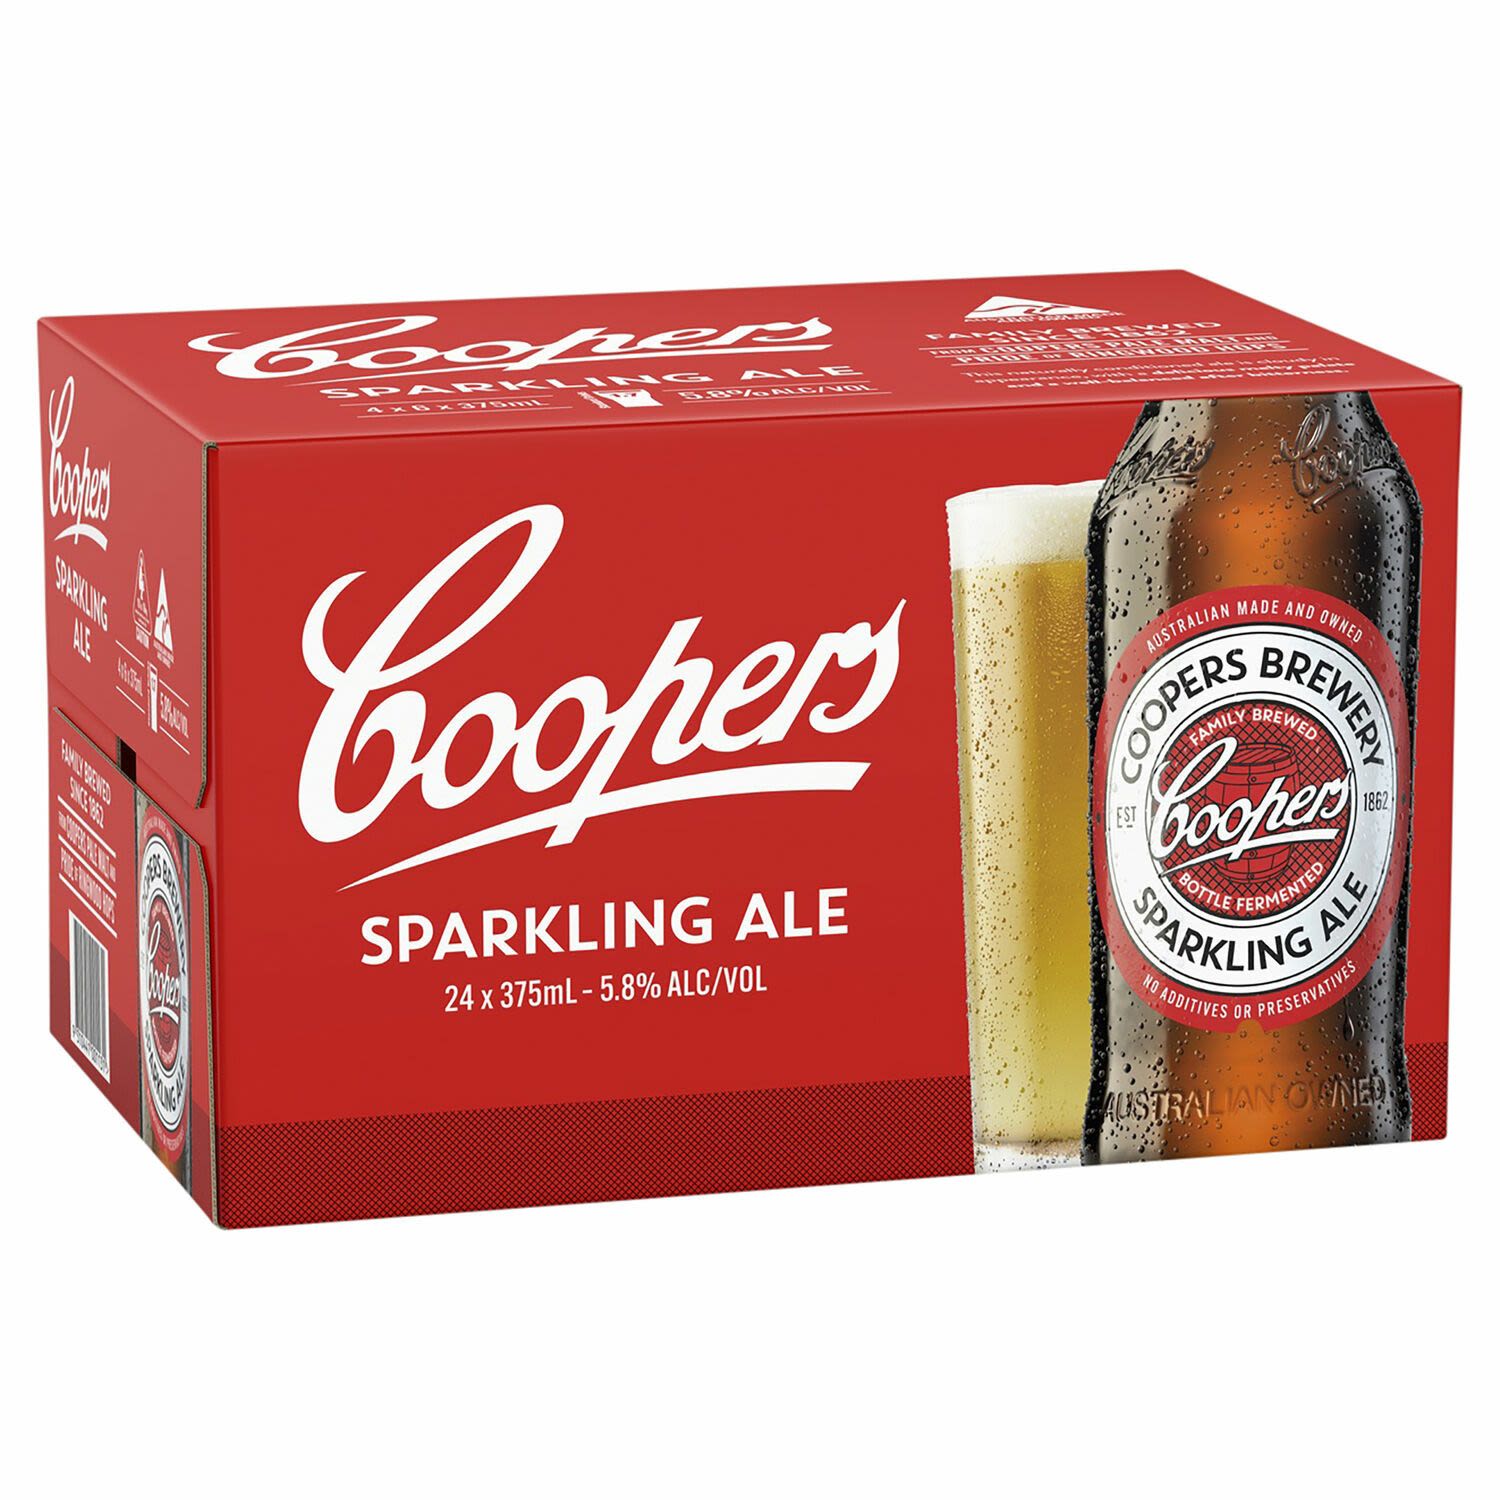 Coopers Sparkling Ale Bottle 375mL 24 Pack